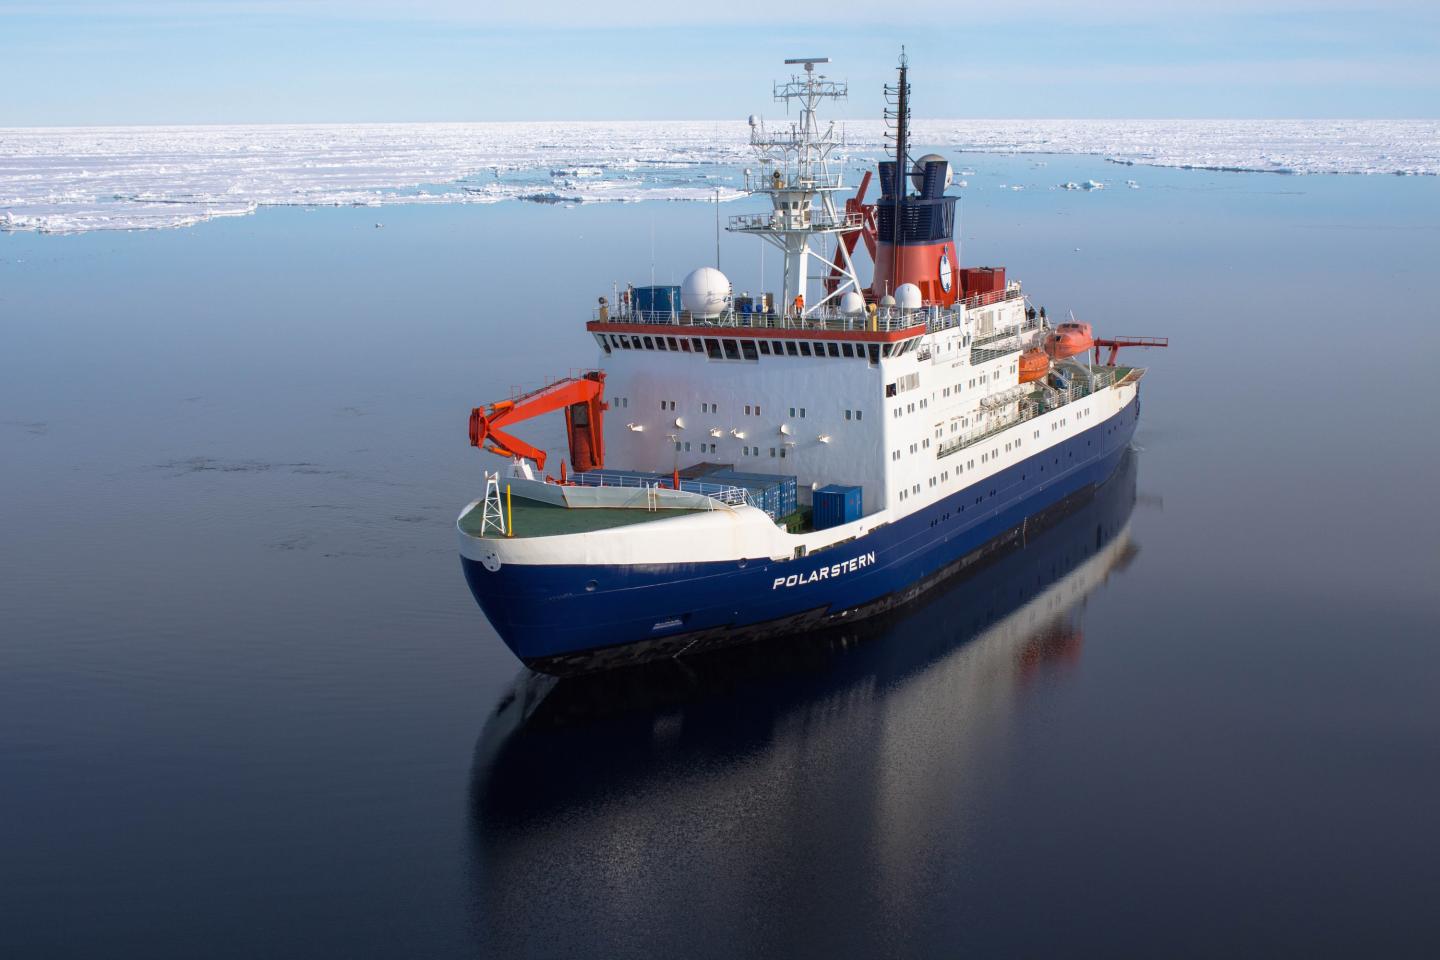 The Research Vessel Polarstern in the Arctic